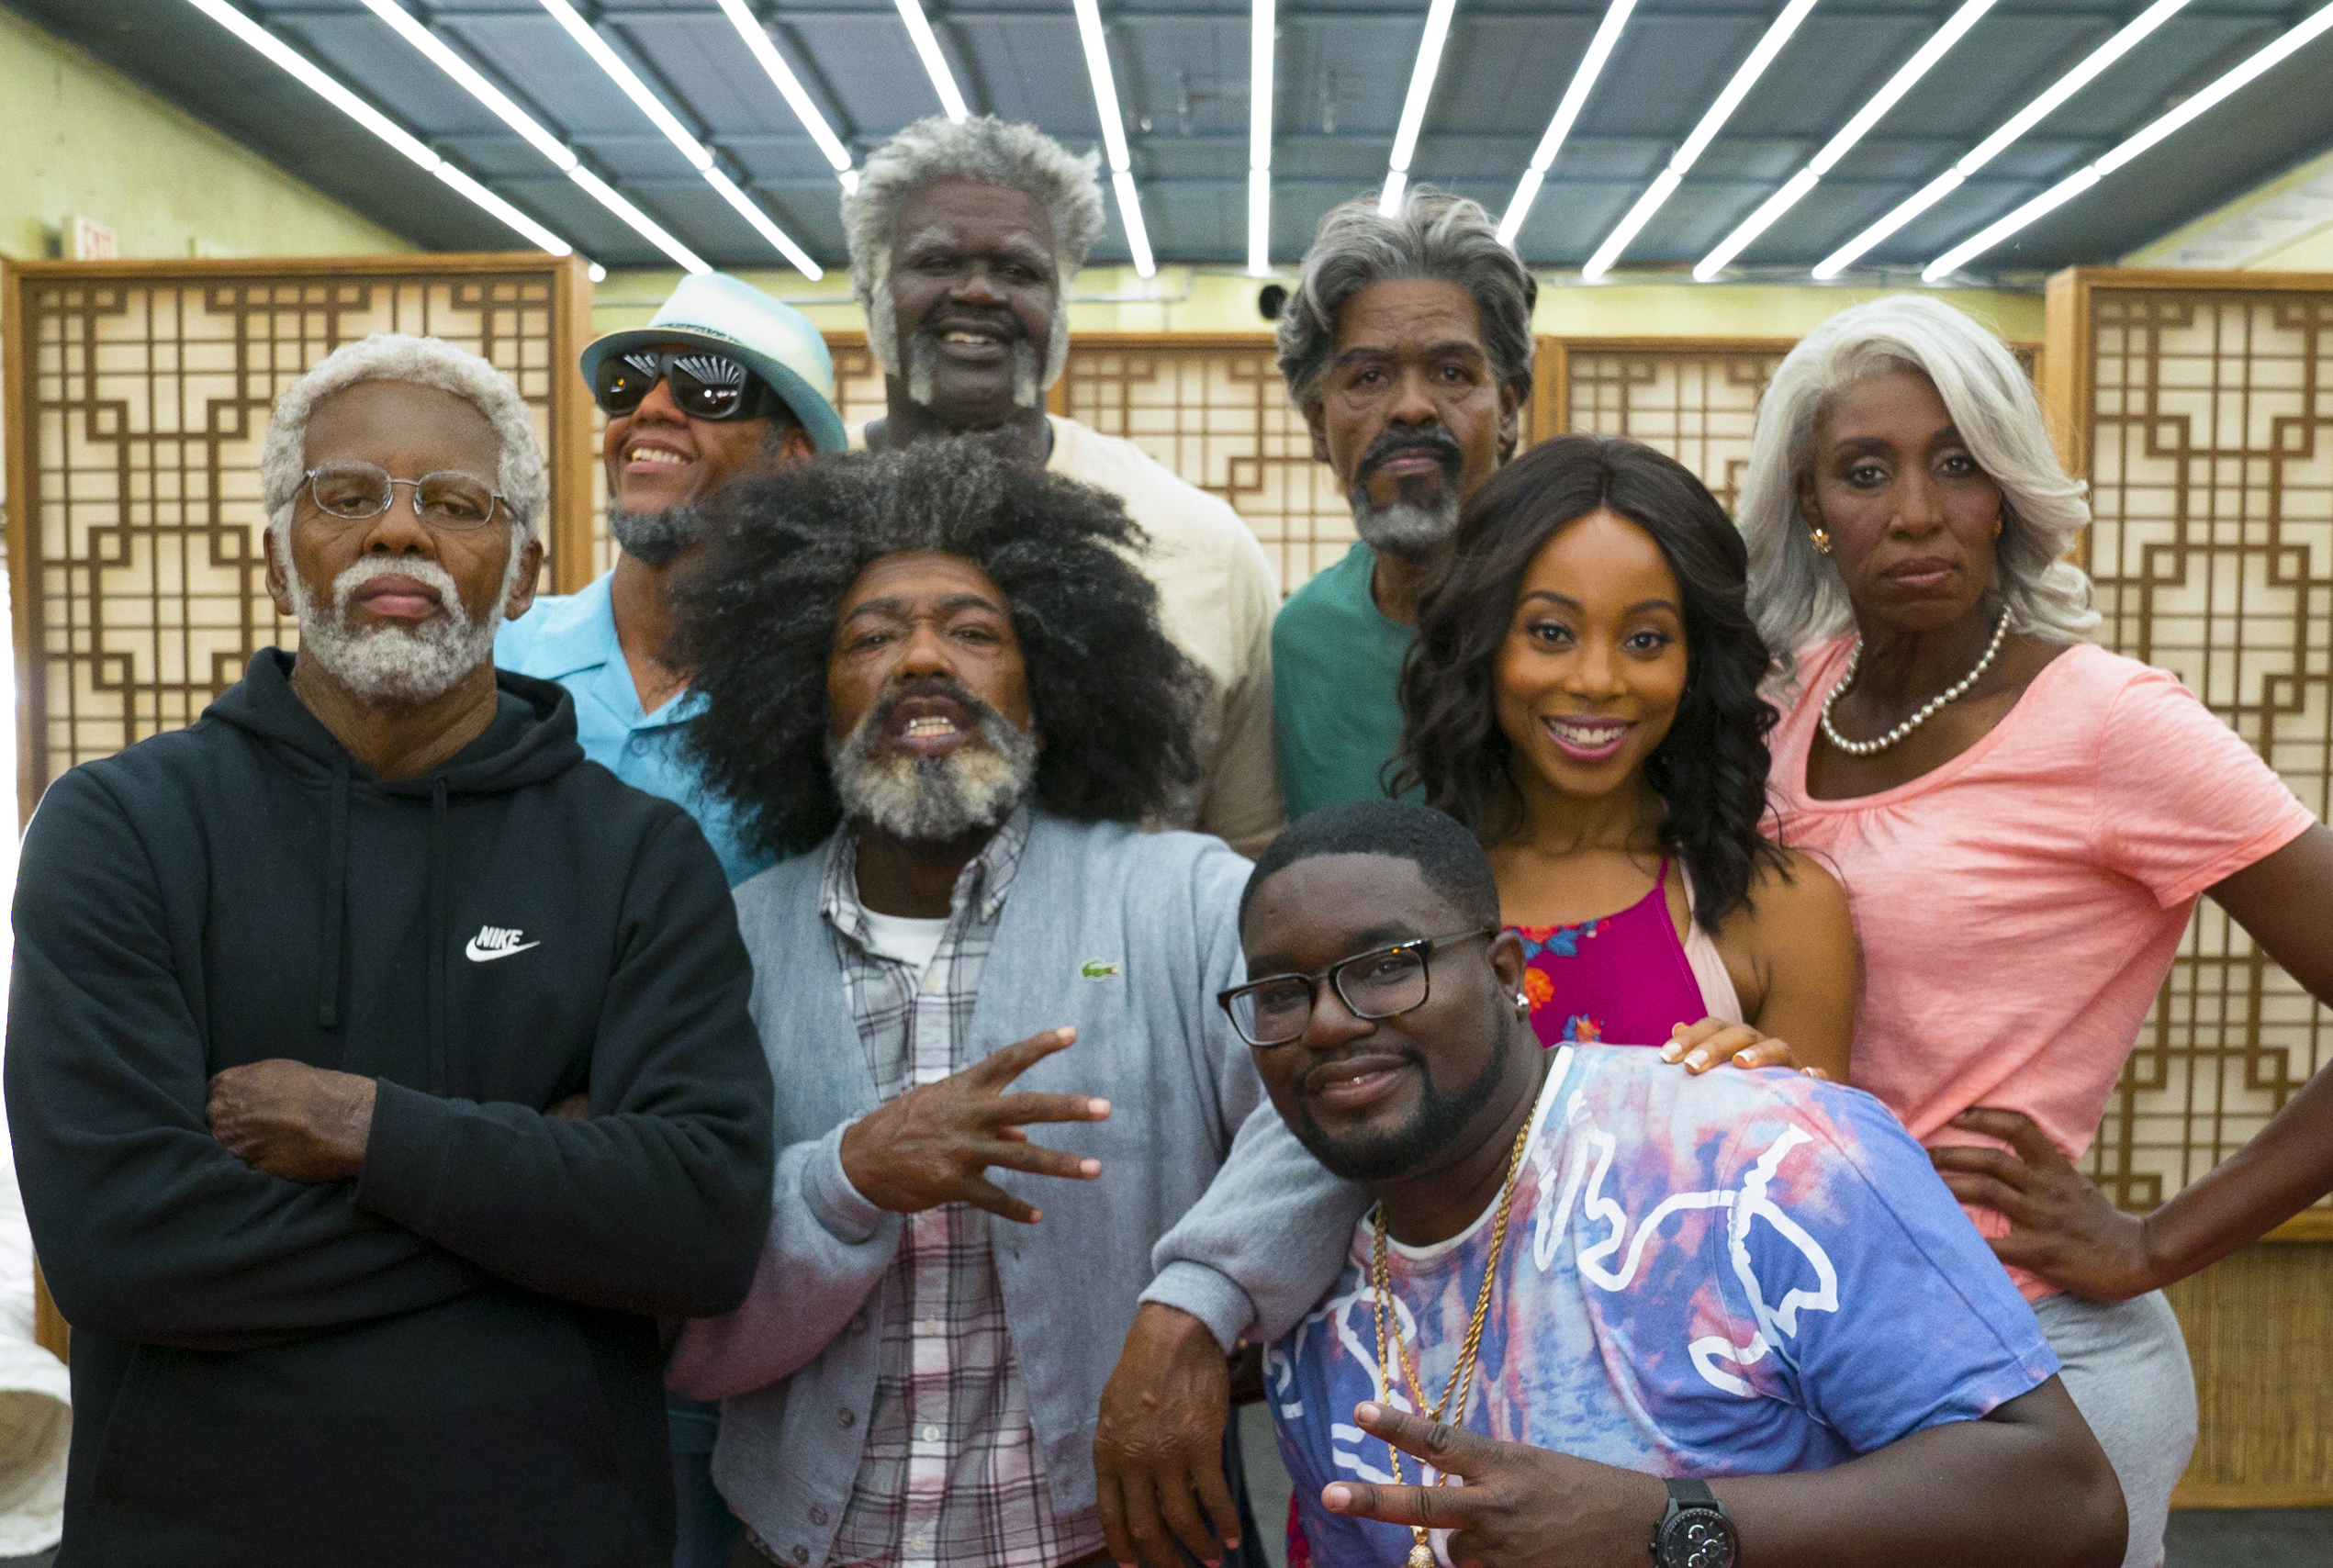  Exclusive first look photo of Kyrie Irving, Reggie Miller, Nate Robinson, Shaquille O&rsquo;Neal, Lil Rel Howery, Chris Webber, Erica Ash, and Lisa Leslie in UNCLE DREW, a Summit Entertainment release produced by Temple Hill in association with PepsiCo&rsquo;s Creators League Studios, that will hit theaters on June 29, 2018. Photo Credit: Quantrell Colbert. 